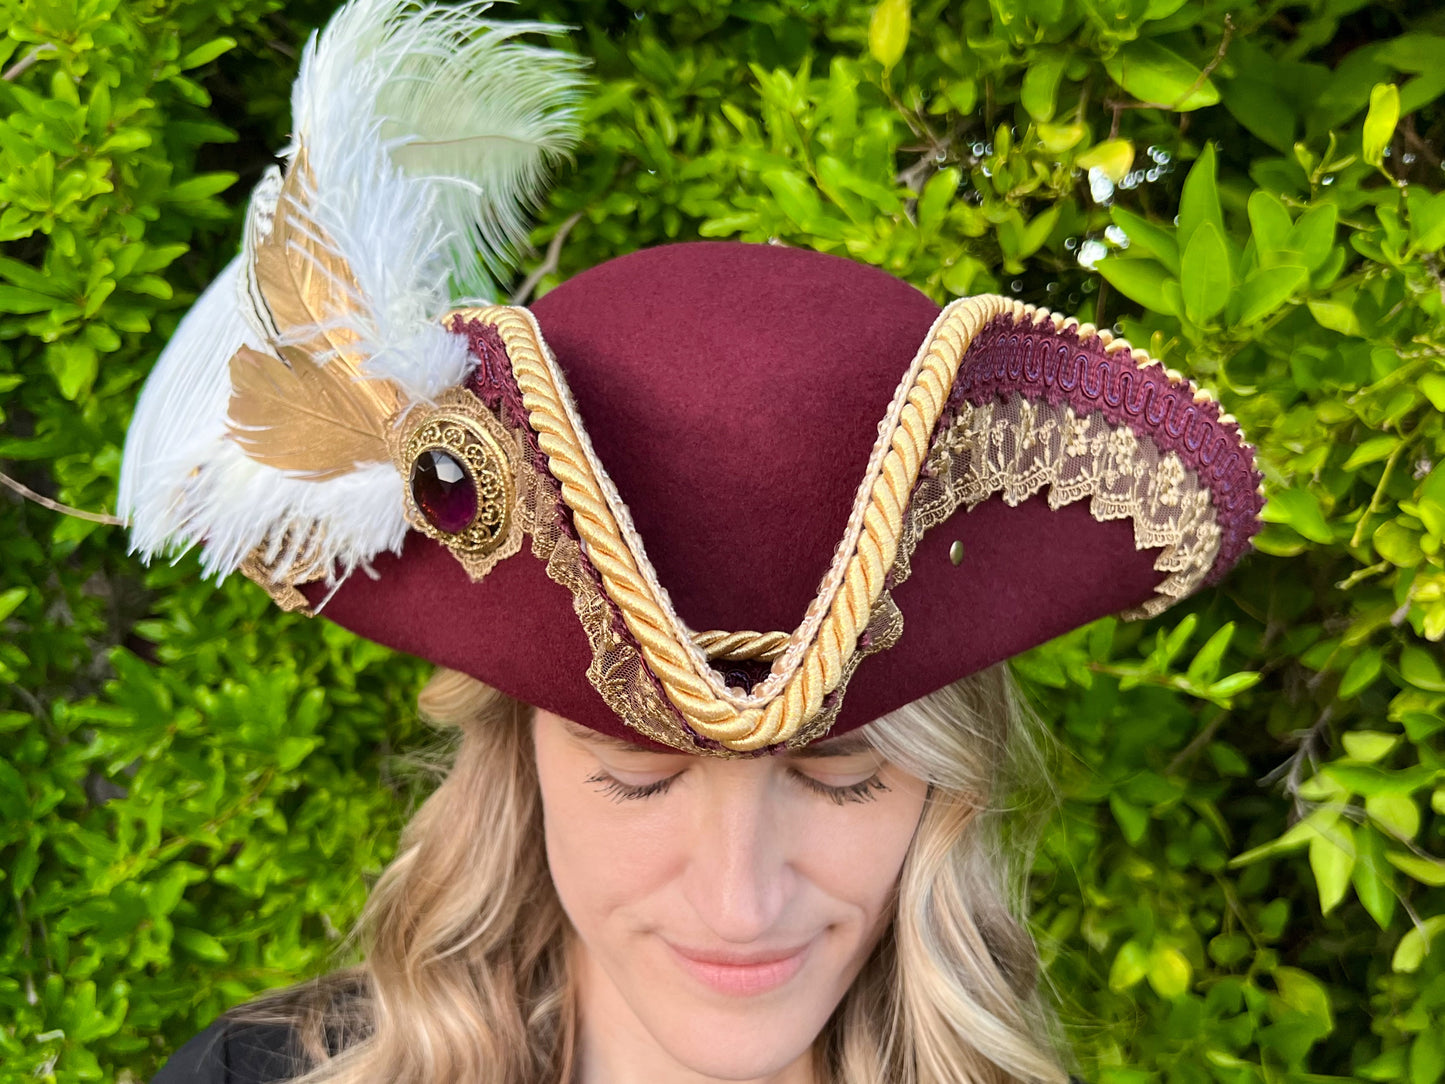 Bicorn Hat 23" Maroon Wool Base with Gold Trim, Feathers, and Vintage Brooch